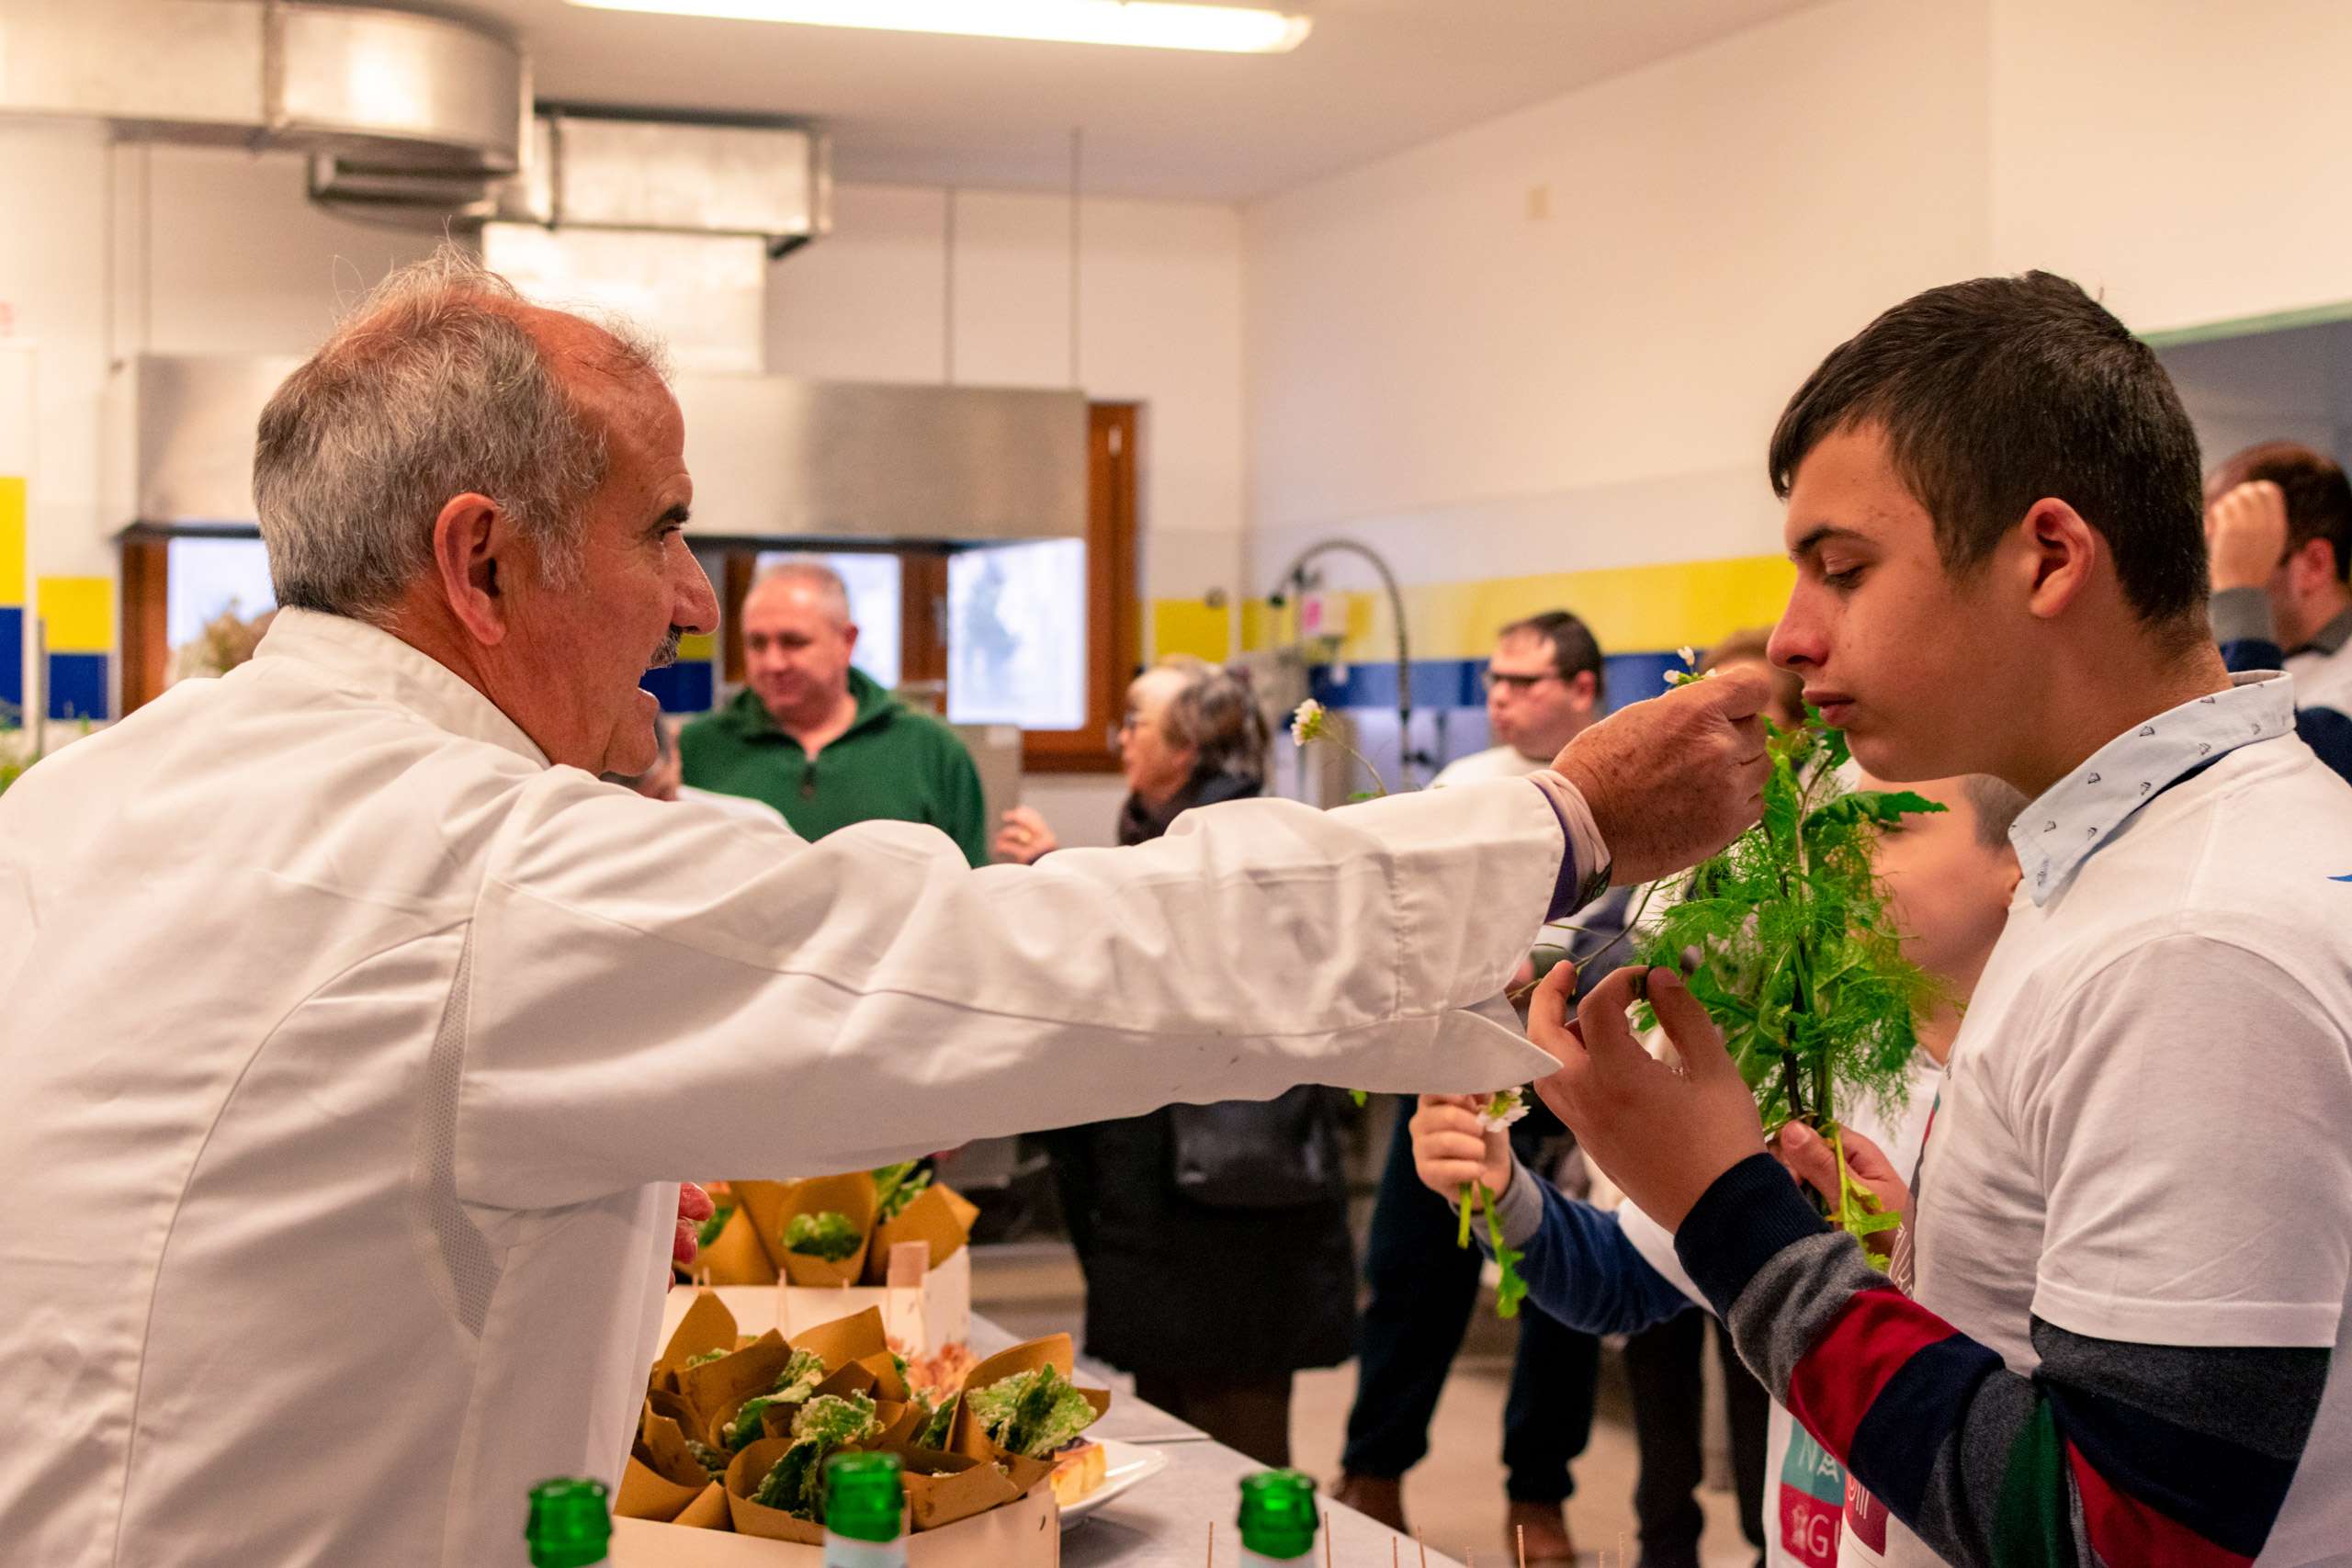 Disabled friendly food experiences with Peppe Zullo and Puglia senza ostacoli.